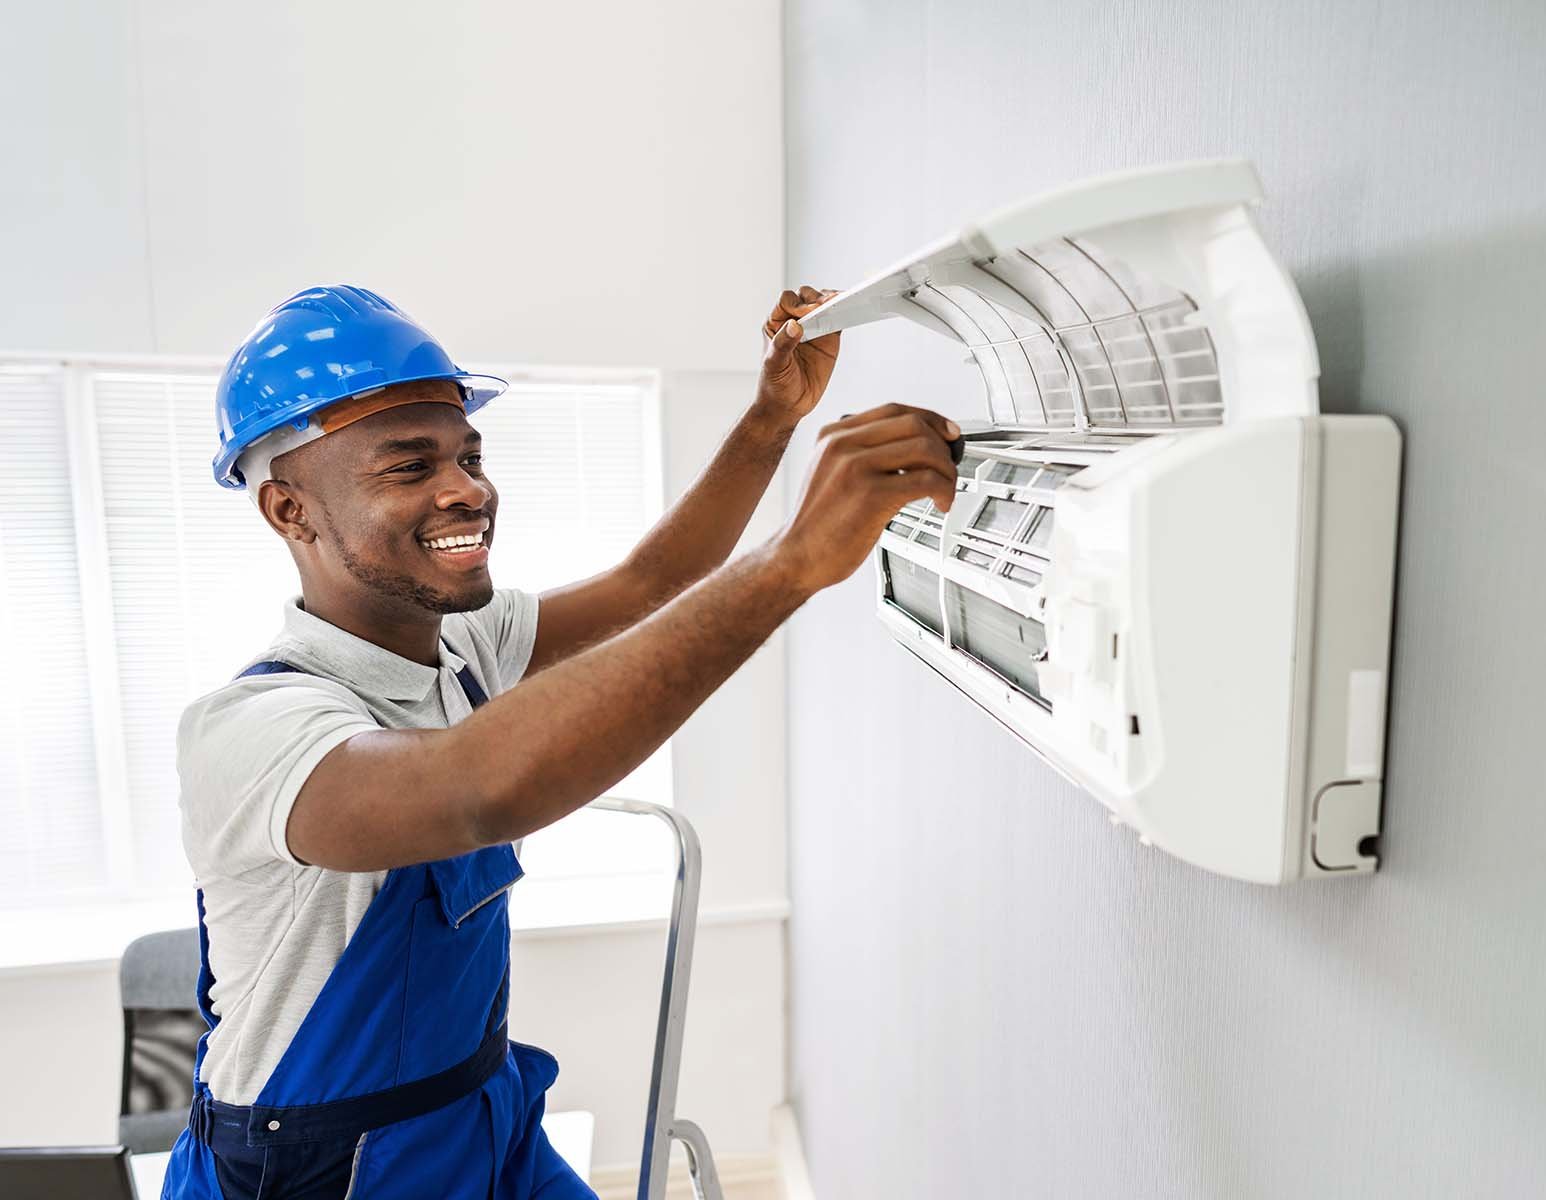 Smiling technician repairing an air conditioner.